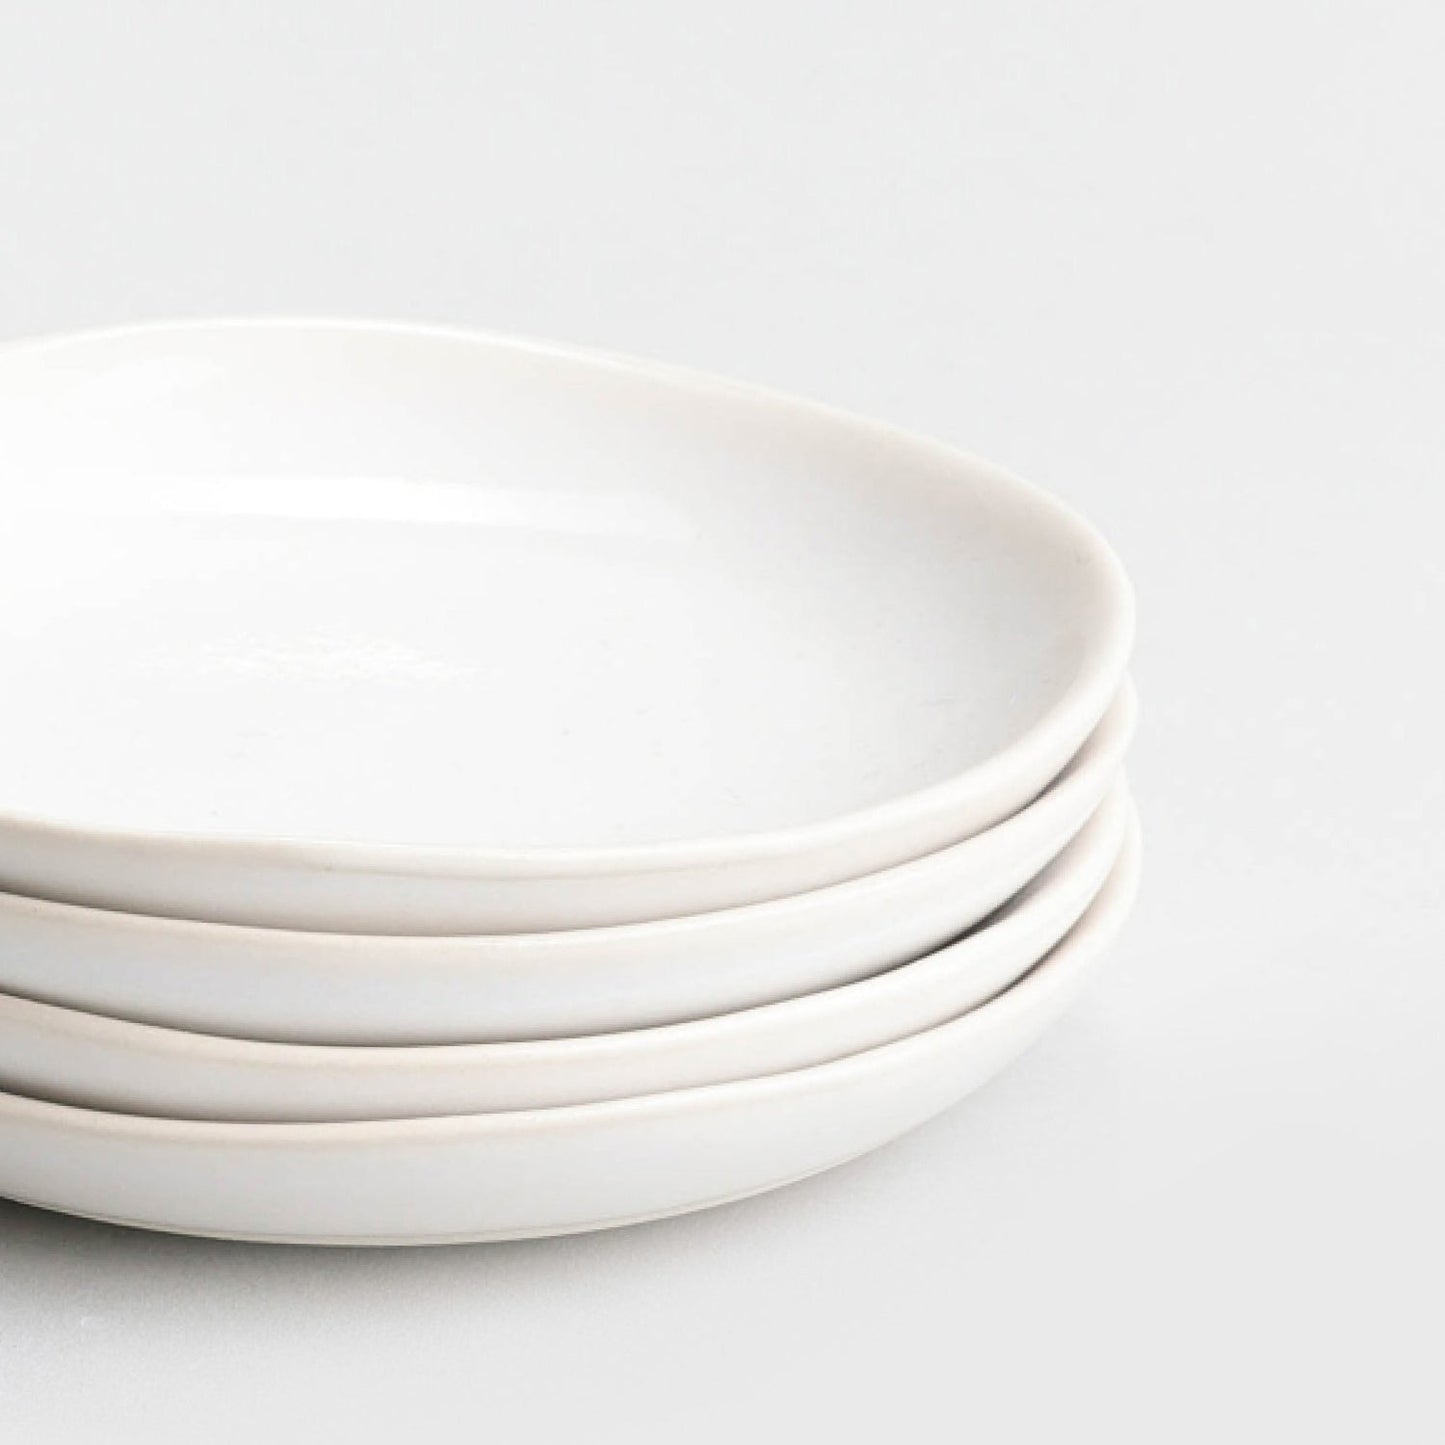 The Little Plates